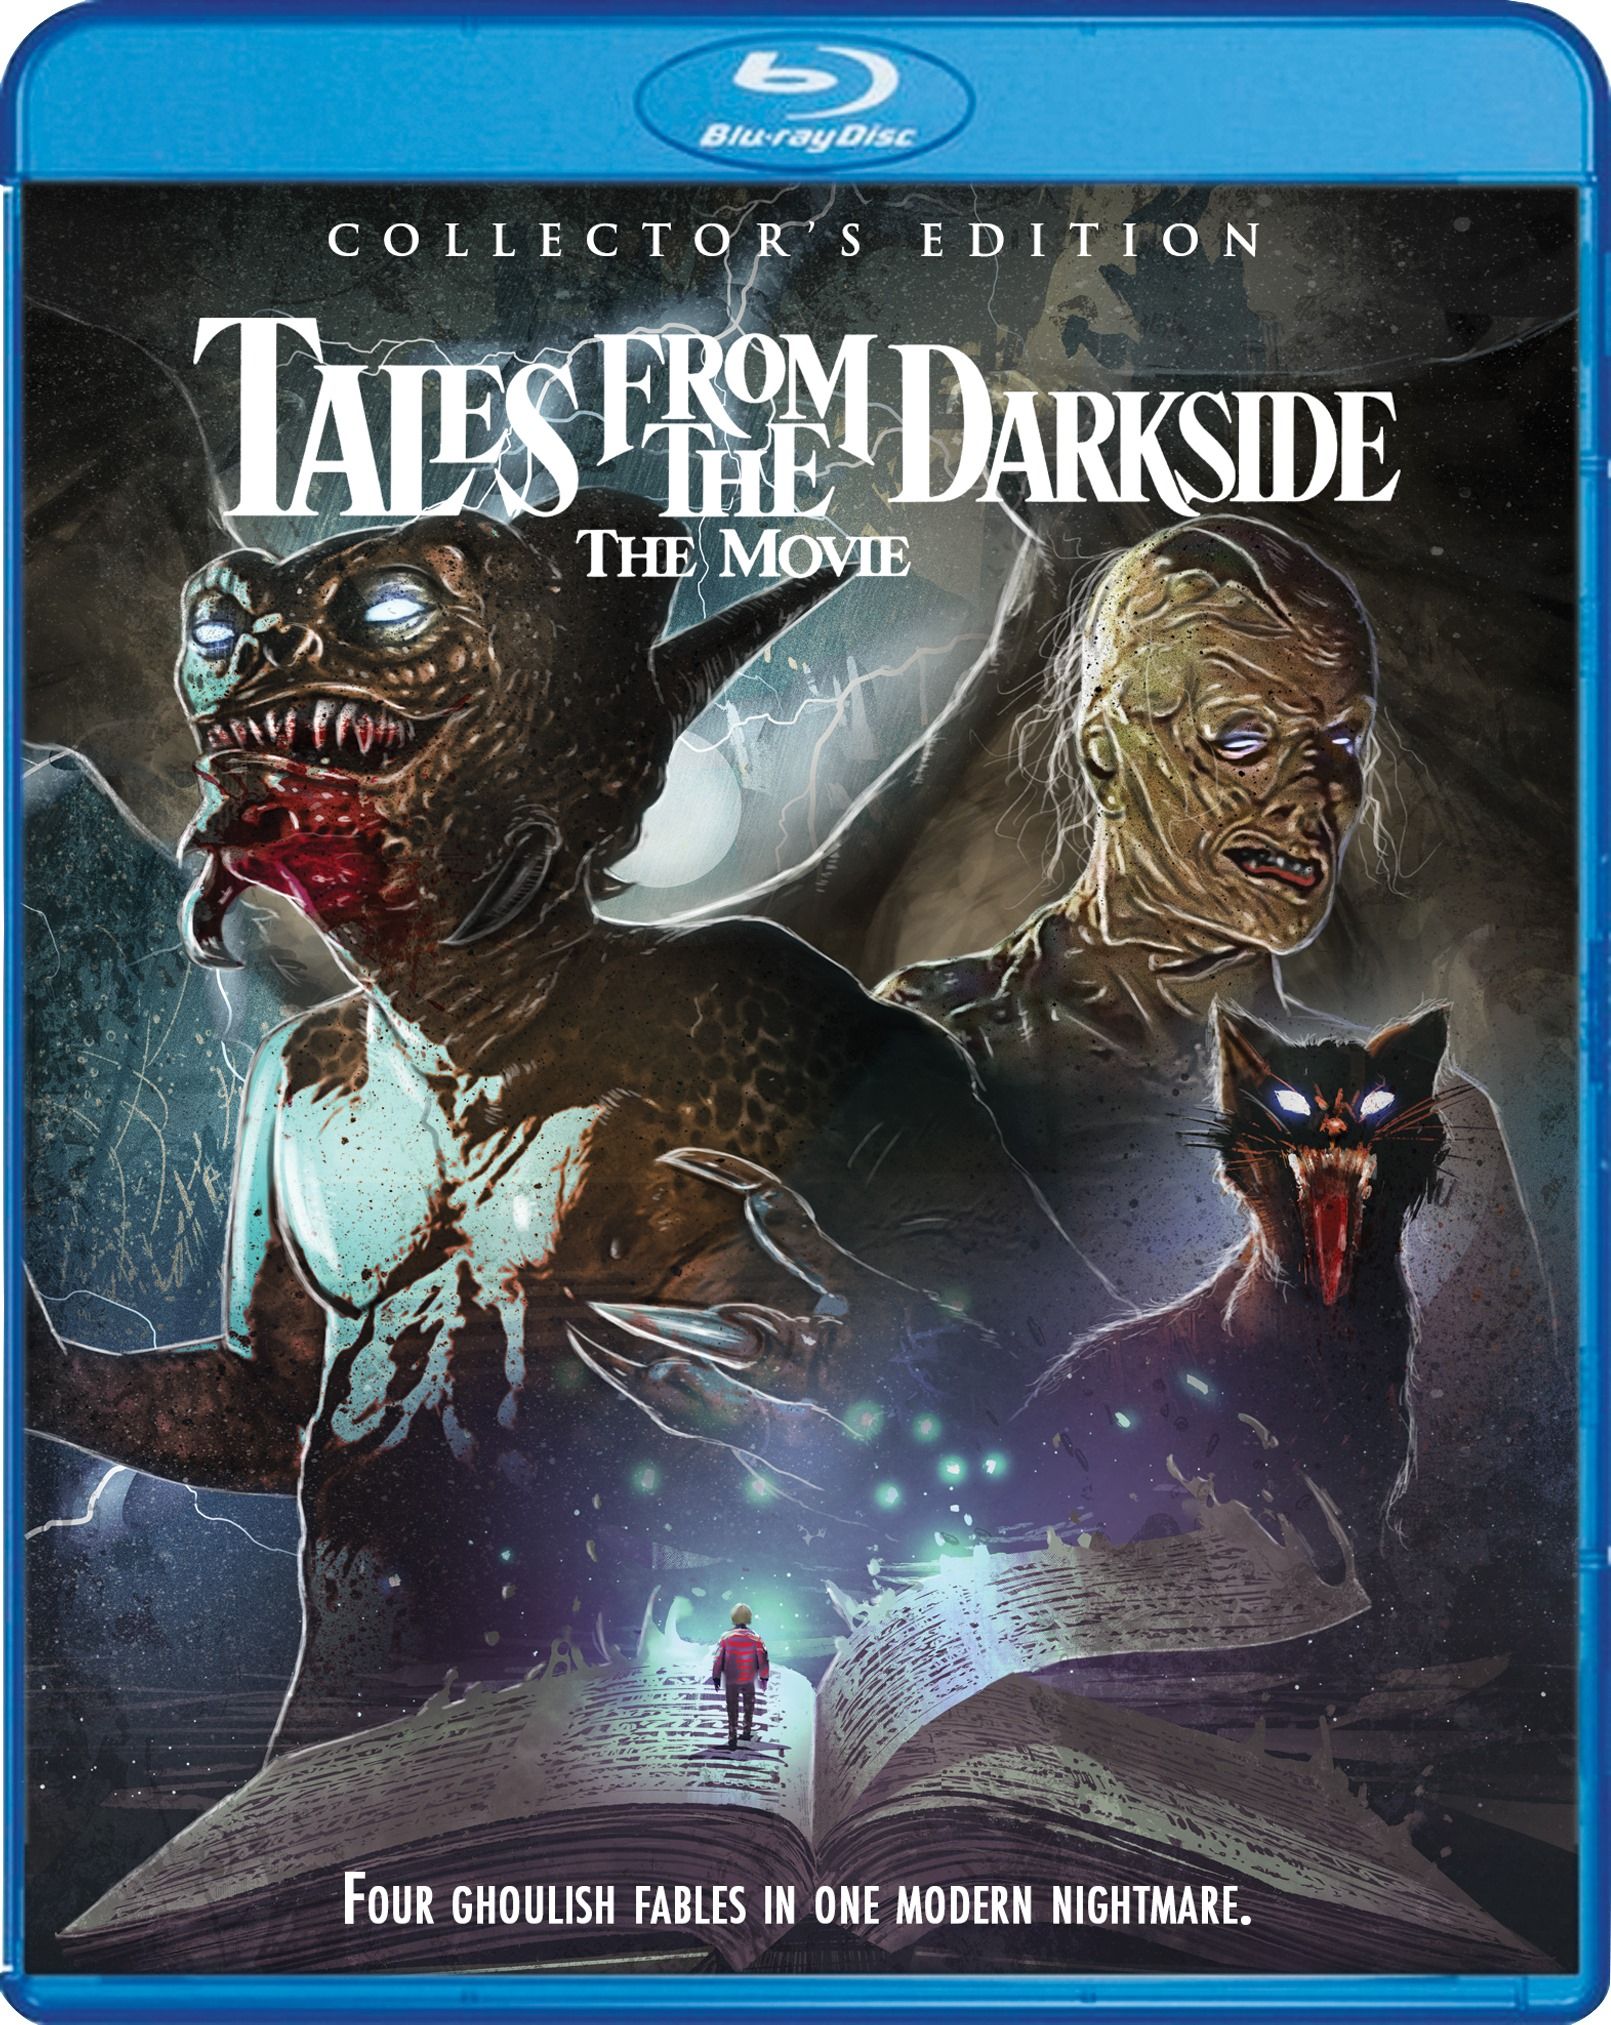 Tales from the Darkside: The Movie blu-ray - Scream Factory